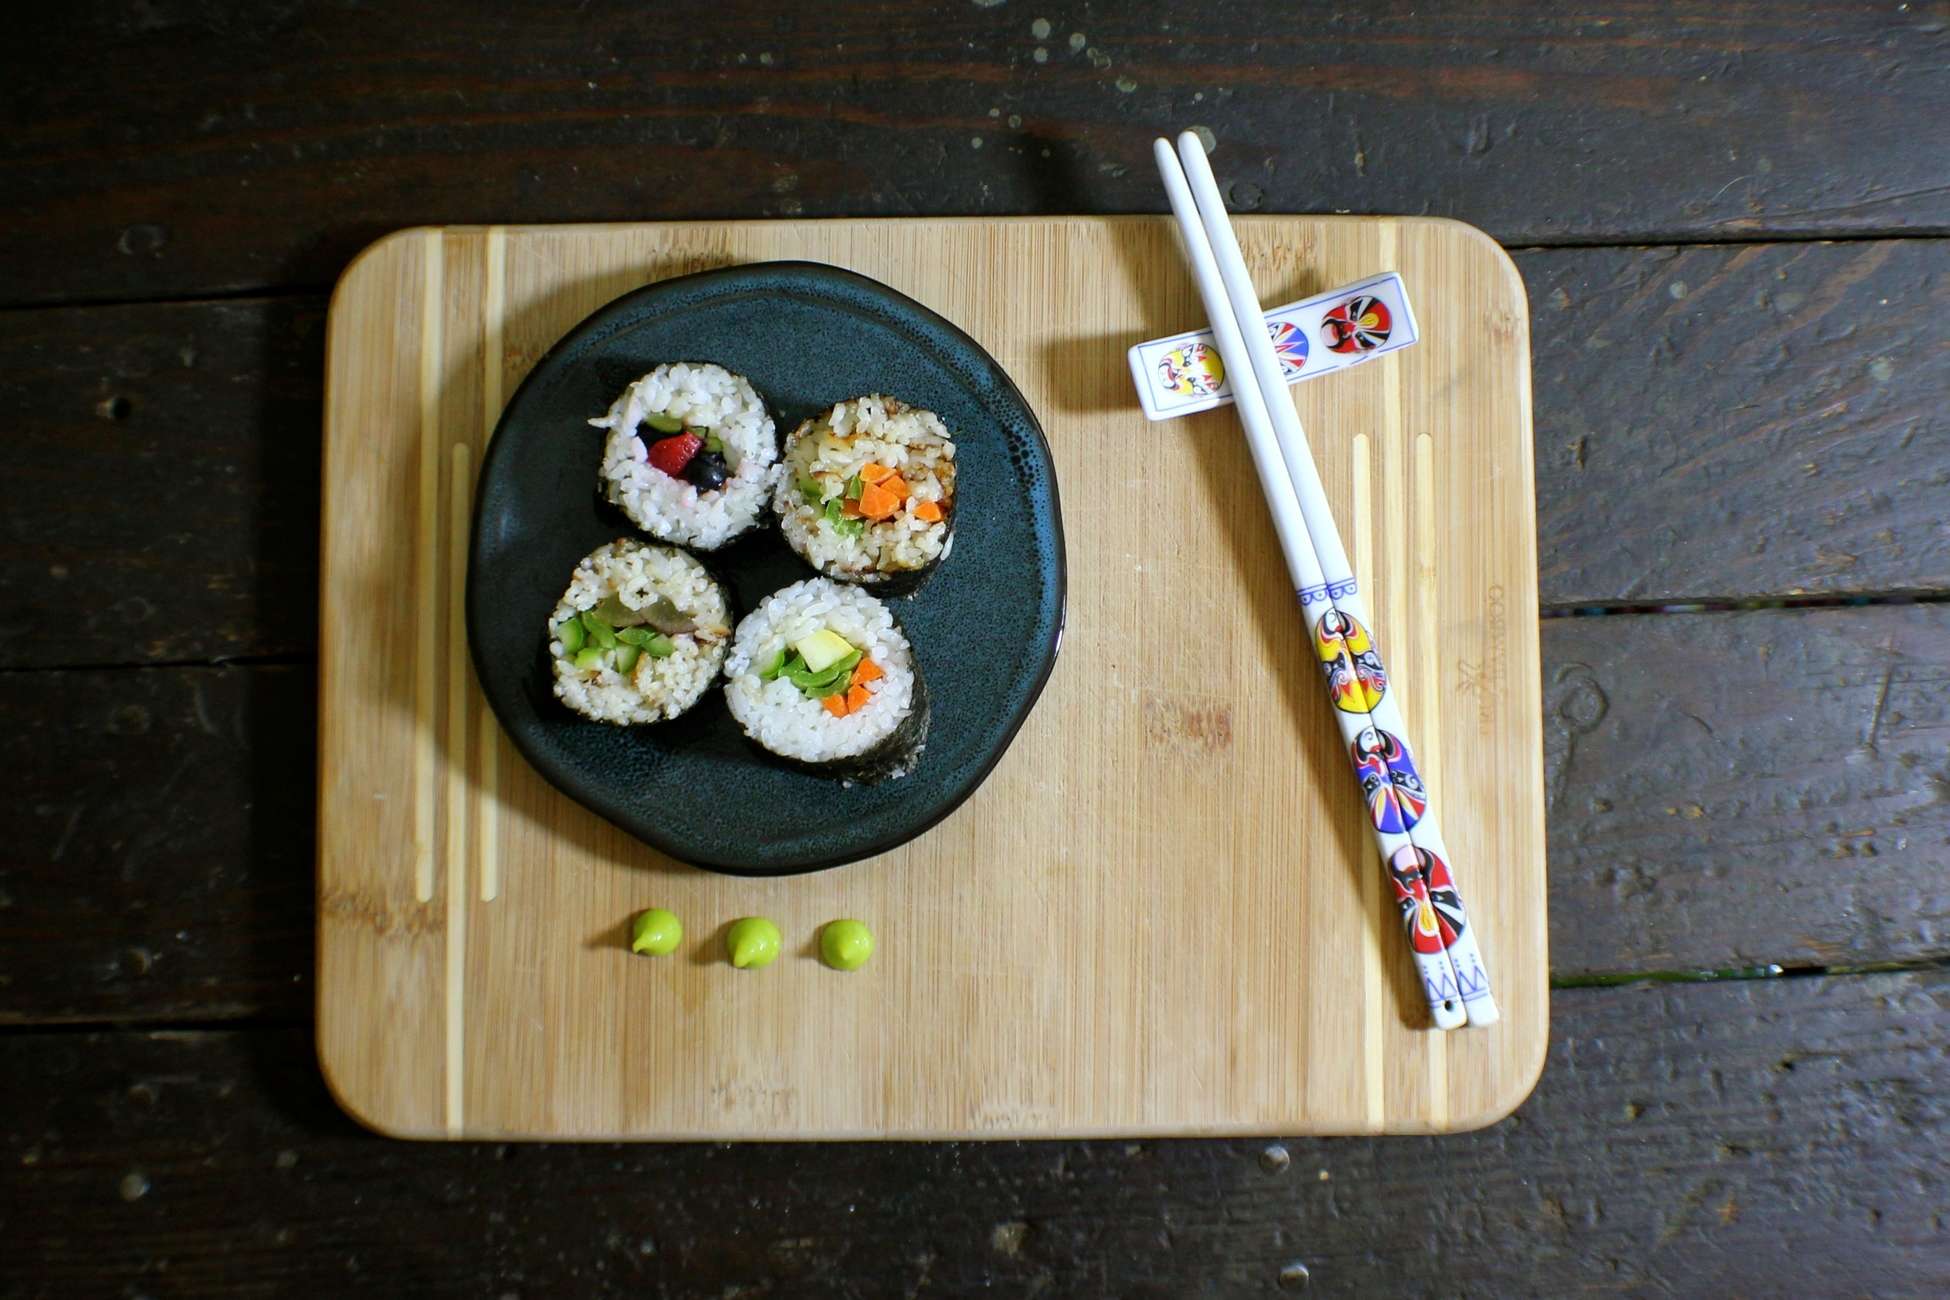 Make Your Own Sushi at Home